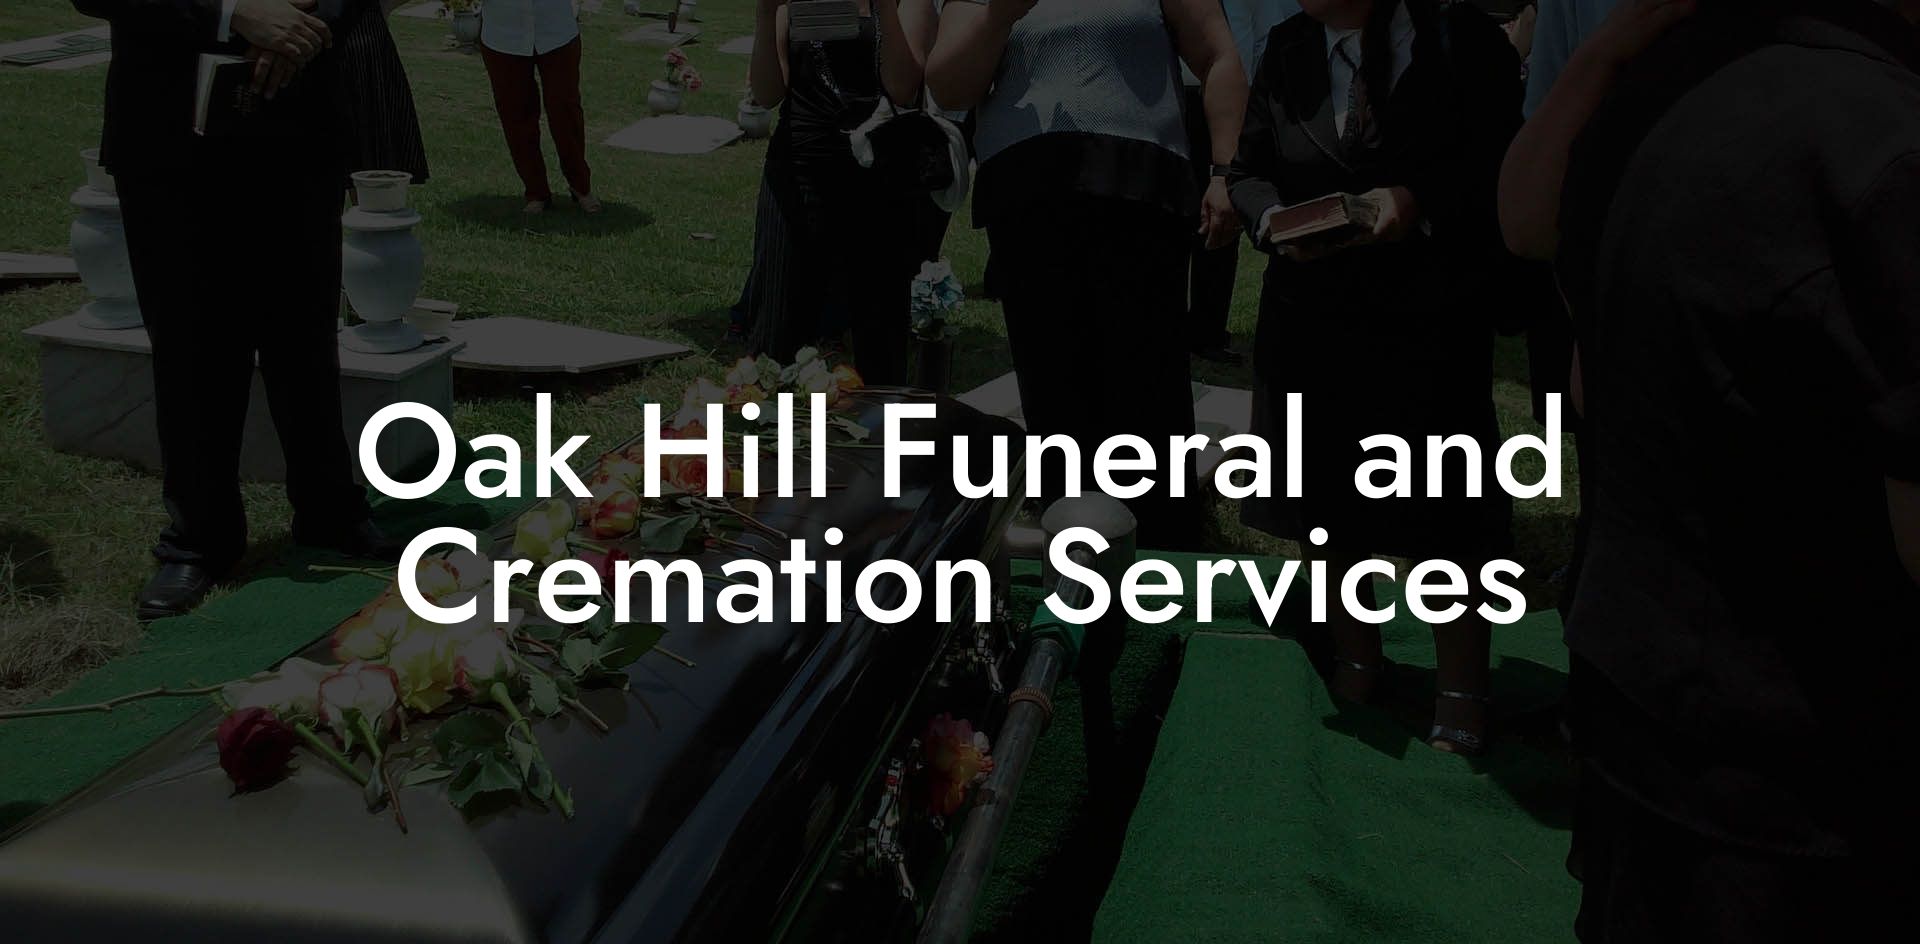 Oak Hill Funeral and Cremation Services